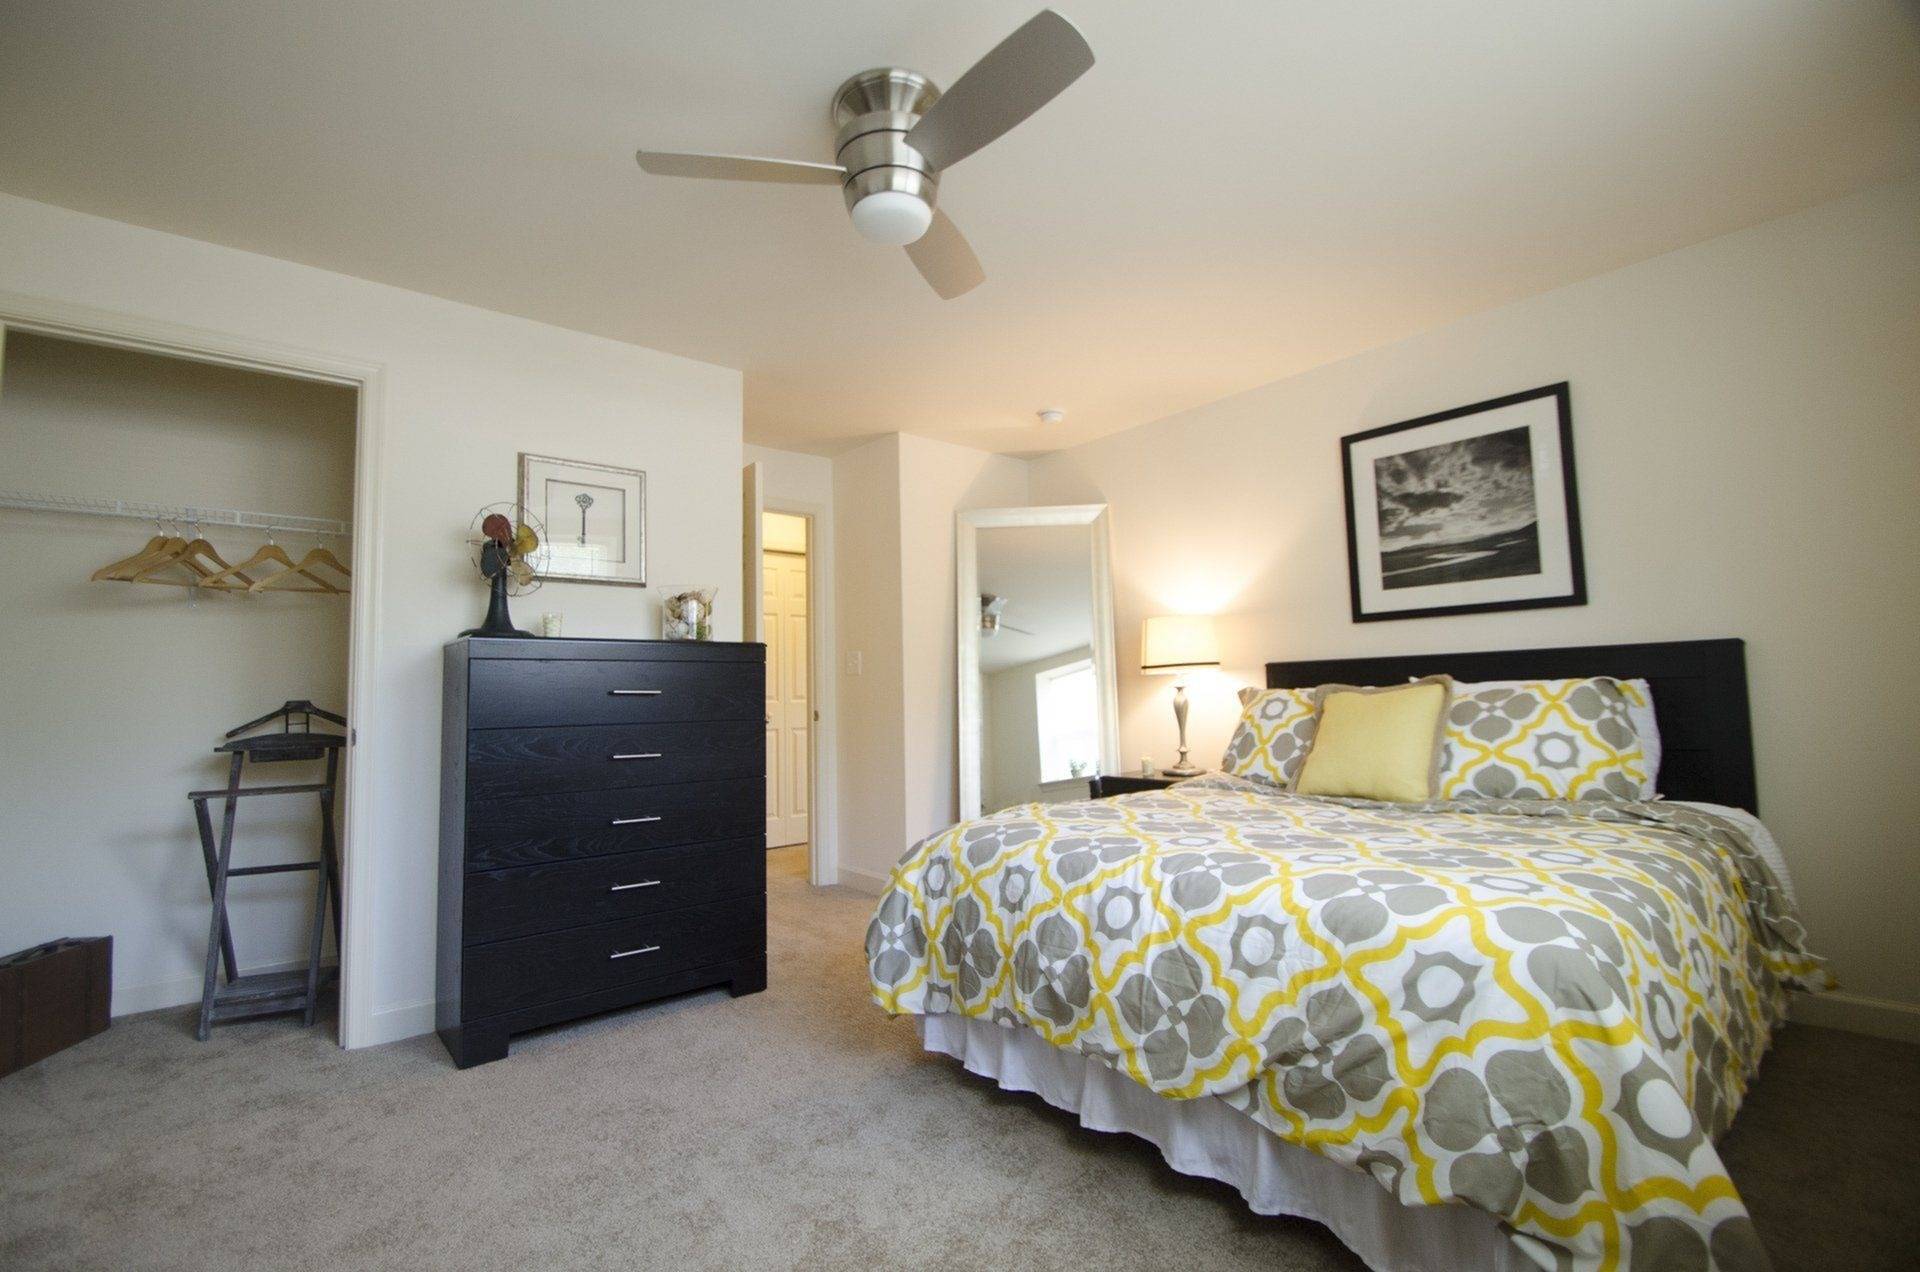 West Chester, PA Apartments - Audubon Pointe - Furnished Bedroom with Spacious Closet, Plush Carpeting, and Ceiling Fan